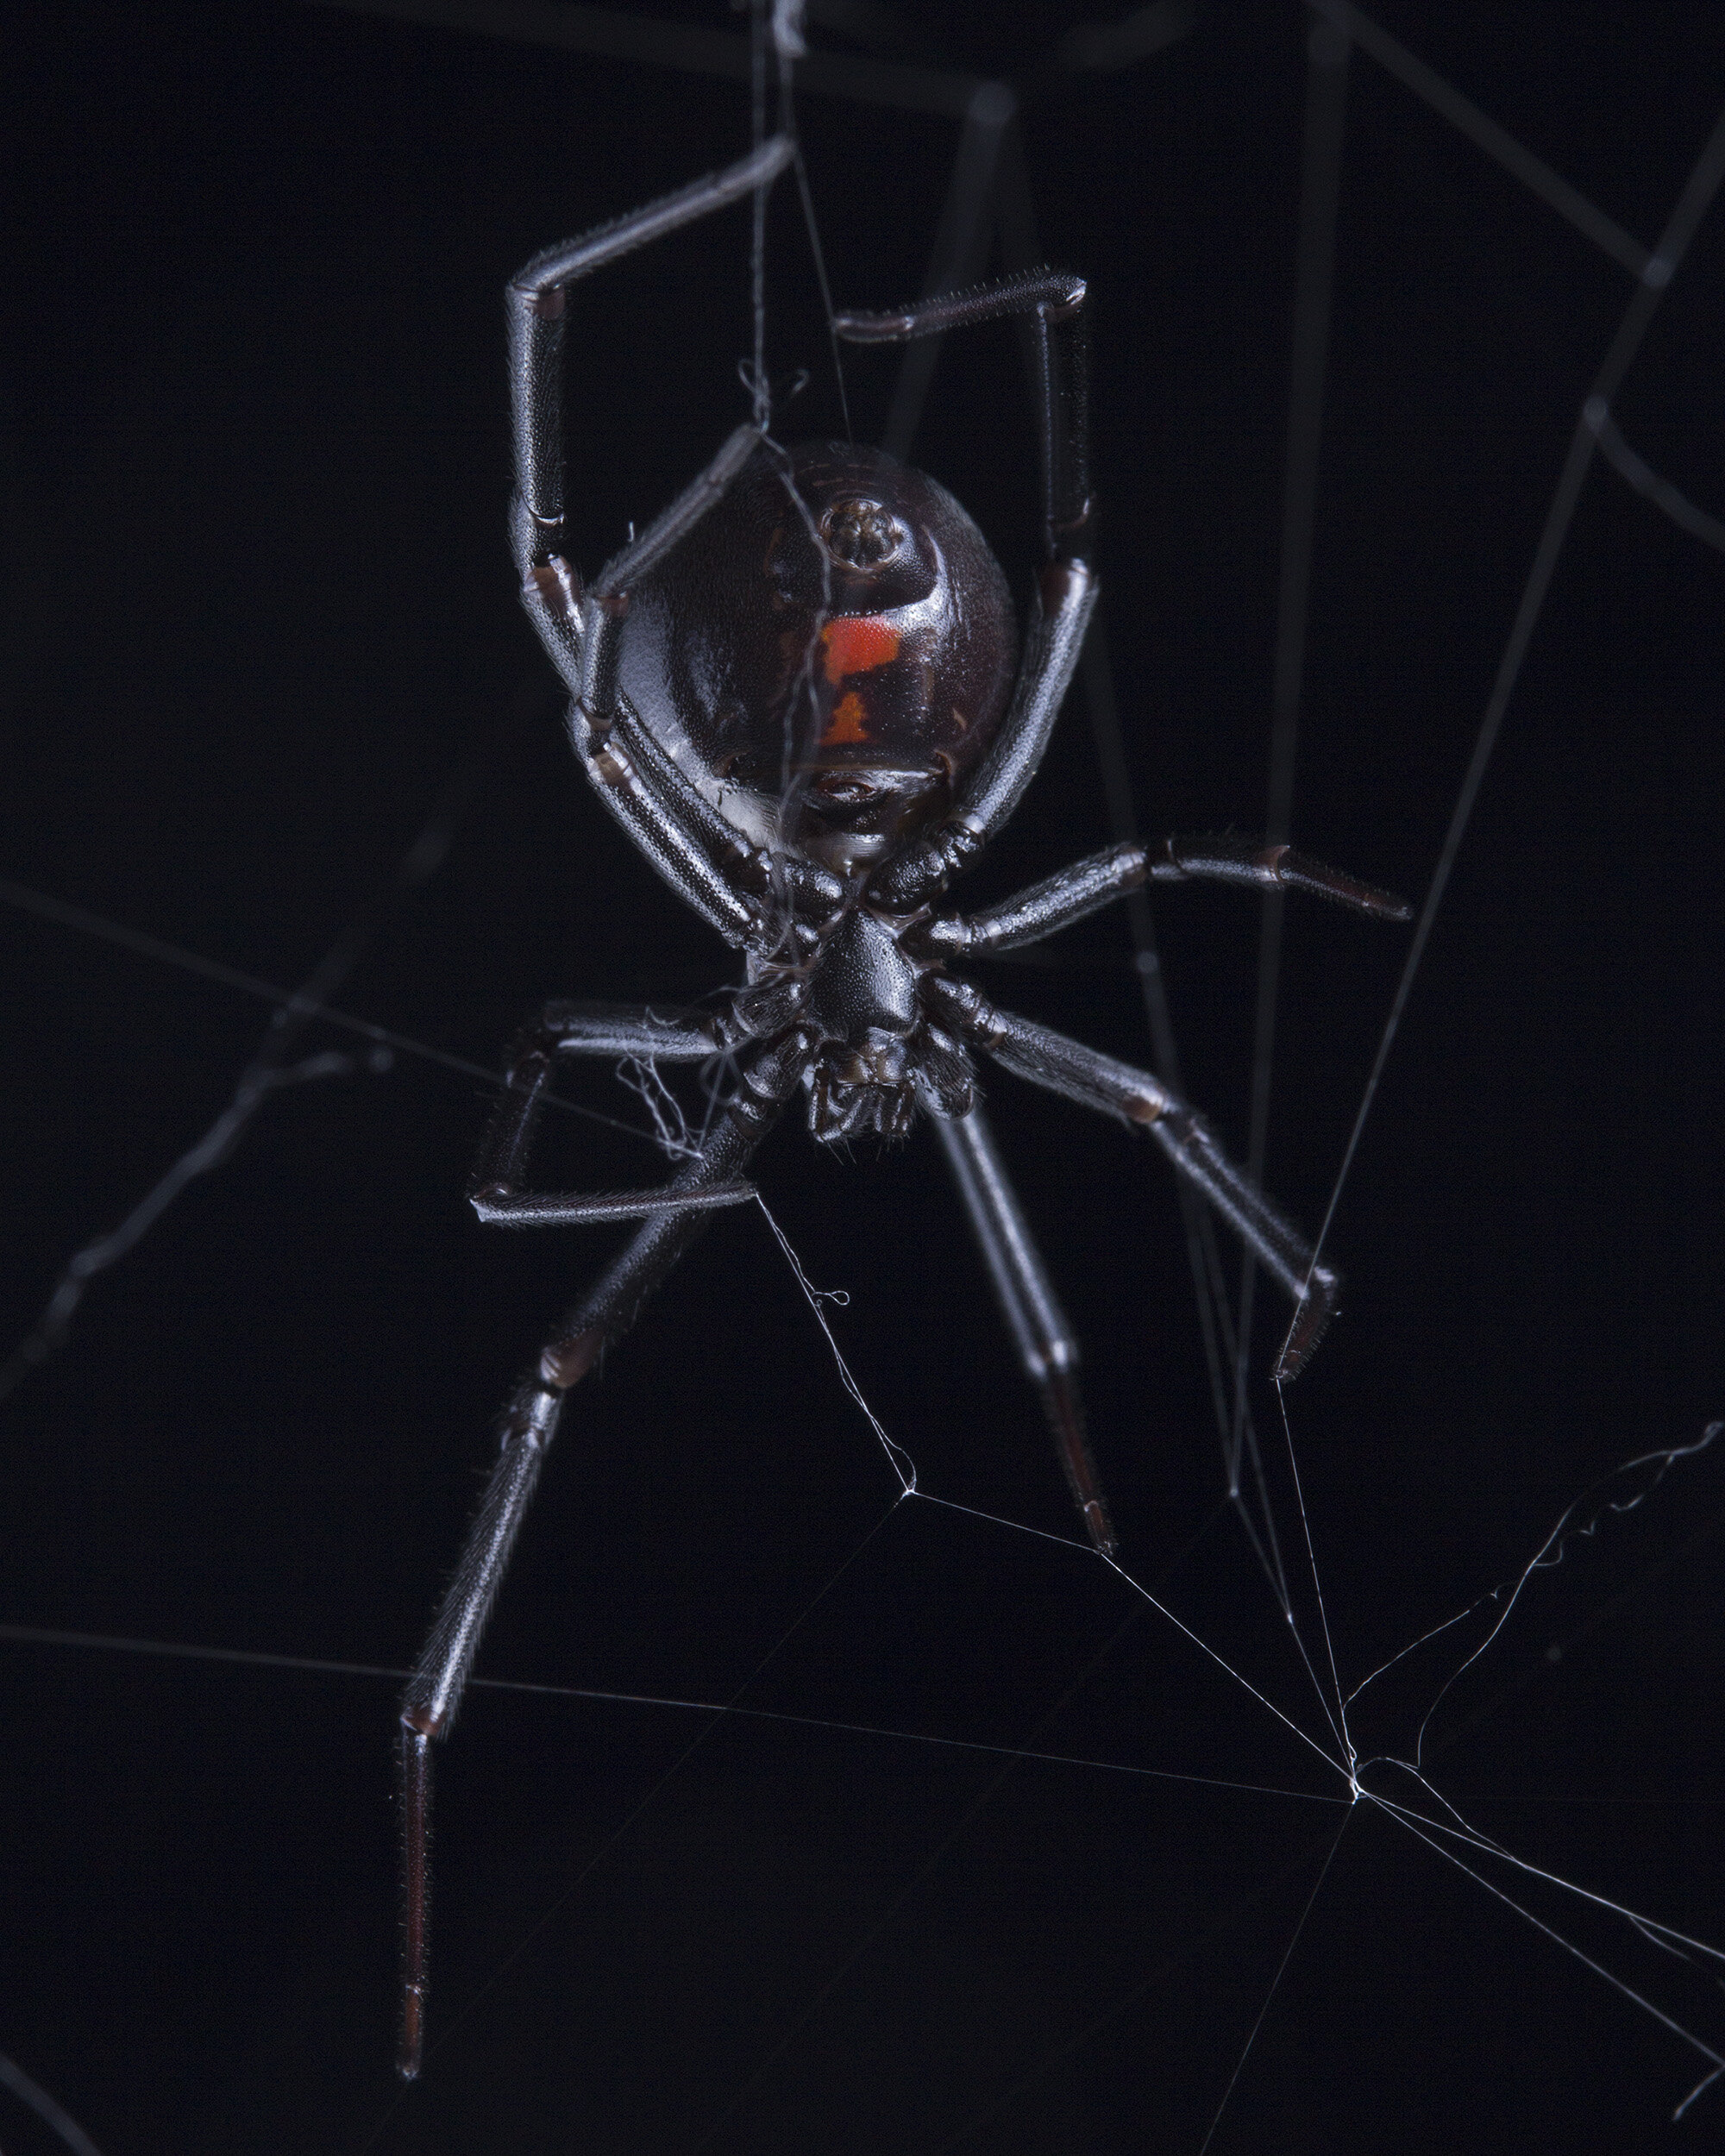 Scientists Say 50,000 Spider Species Have Now Been Discovered - CNET